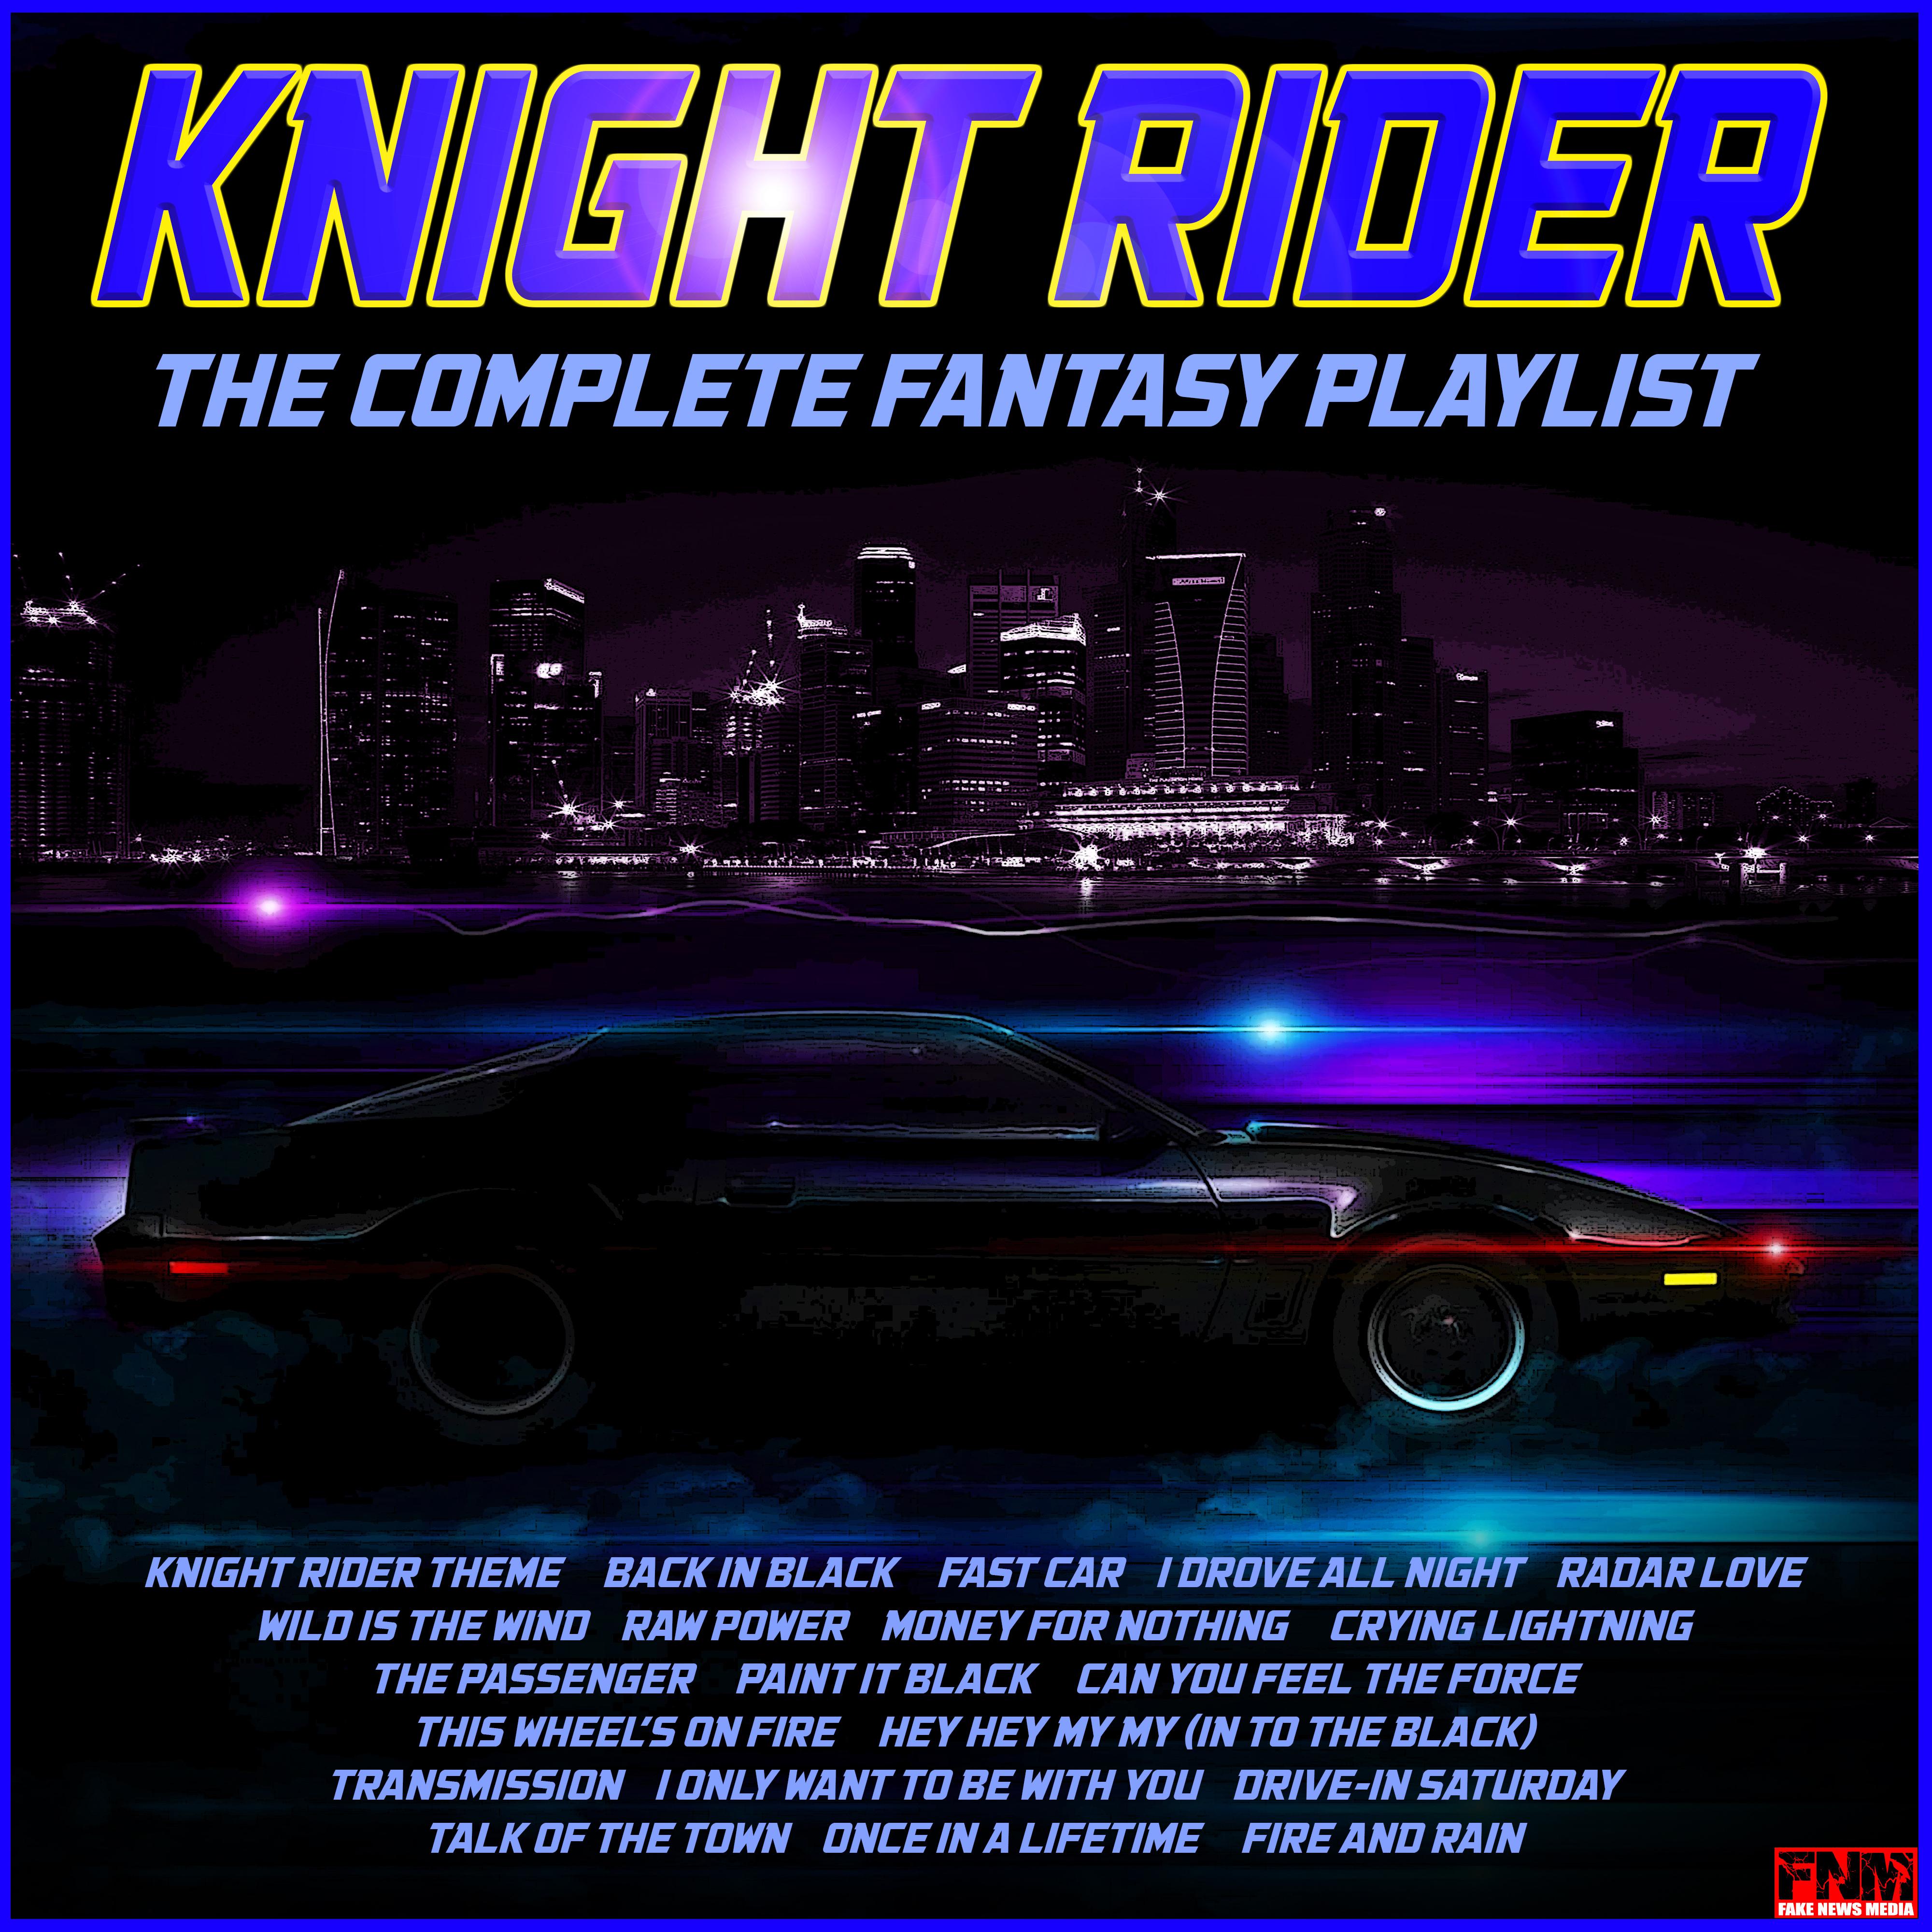 Knightrider - The Theme Music